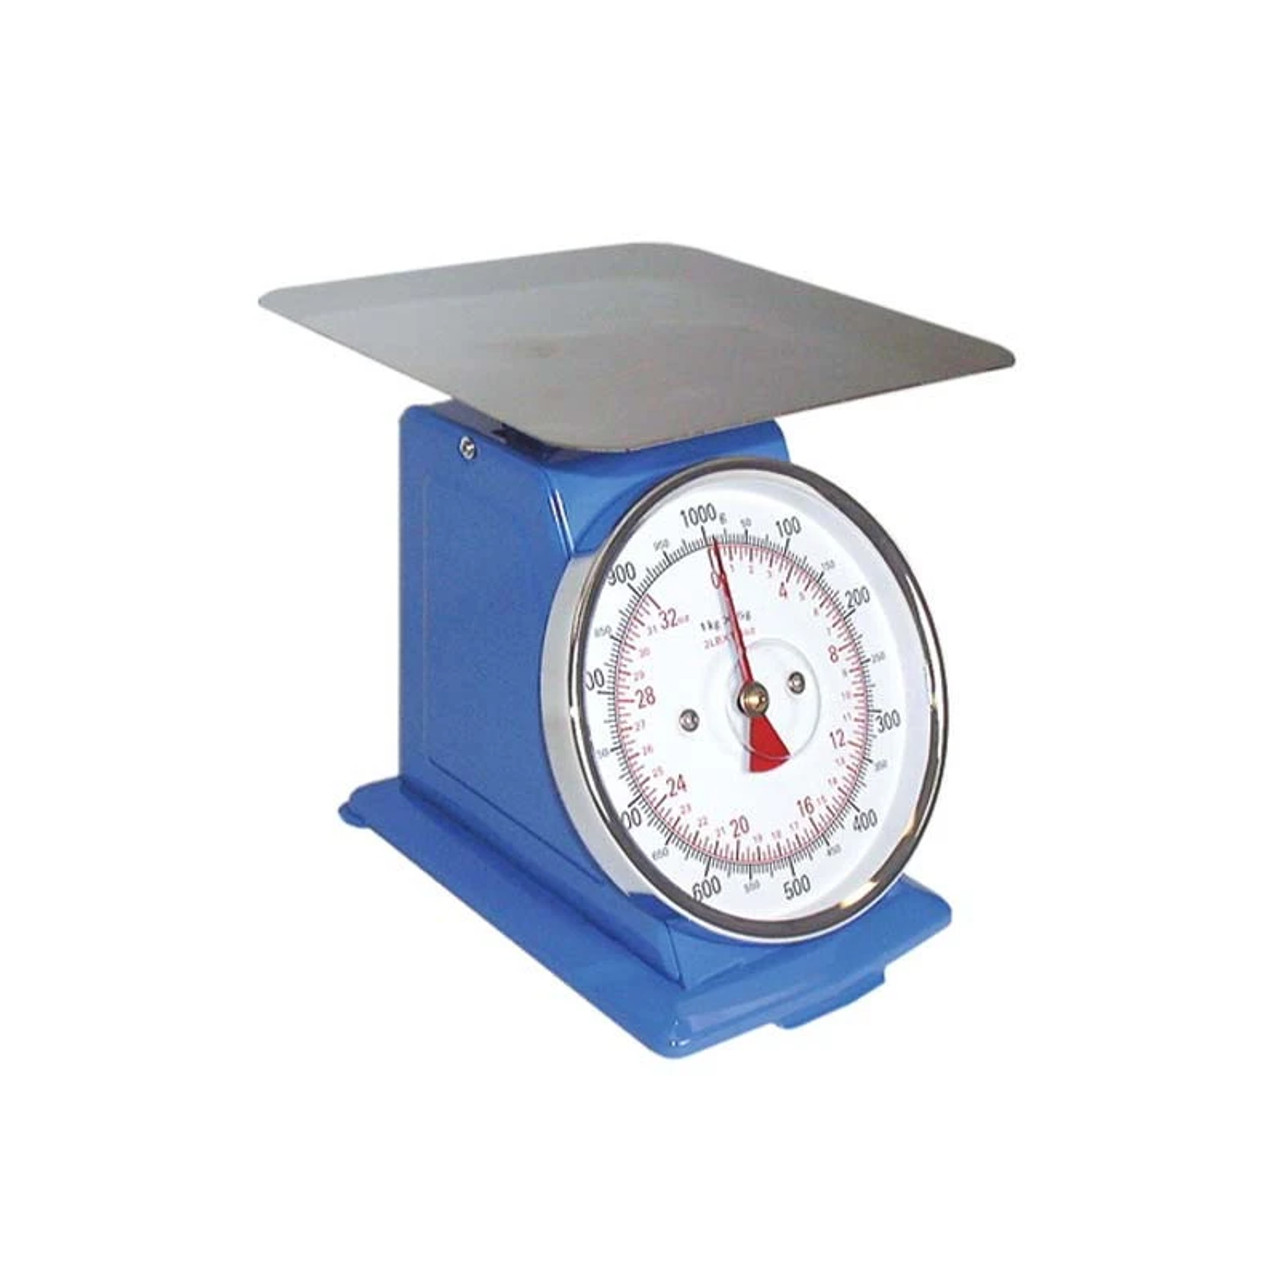 Dial Spring Scale - 2000 G / 4.4 lb.